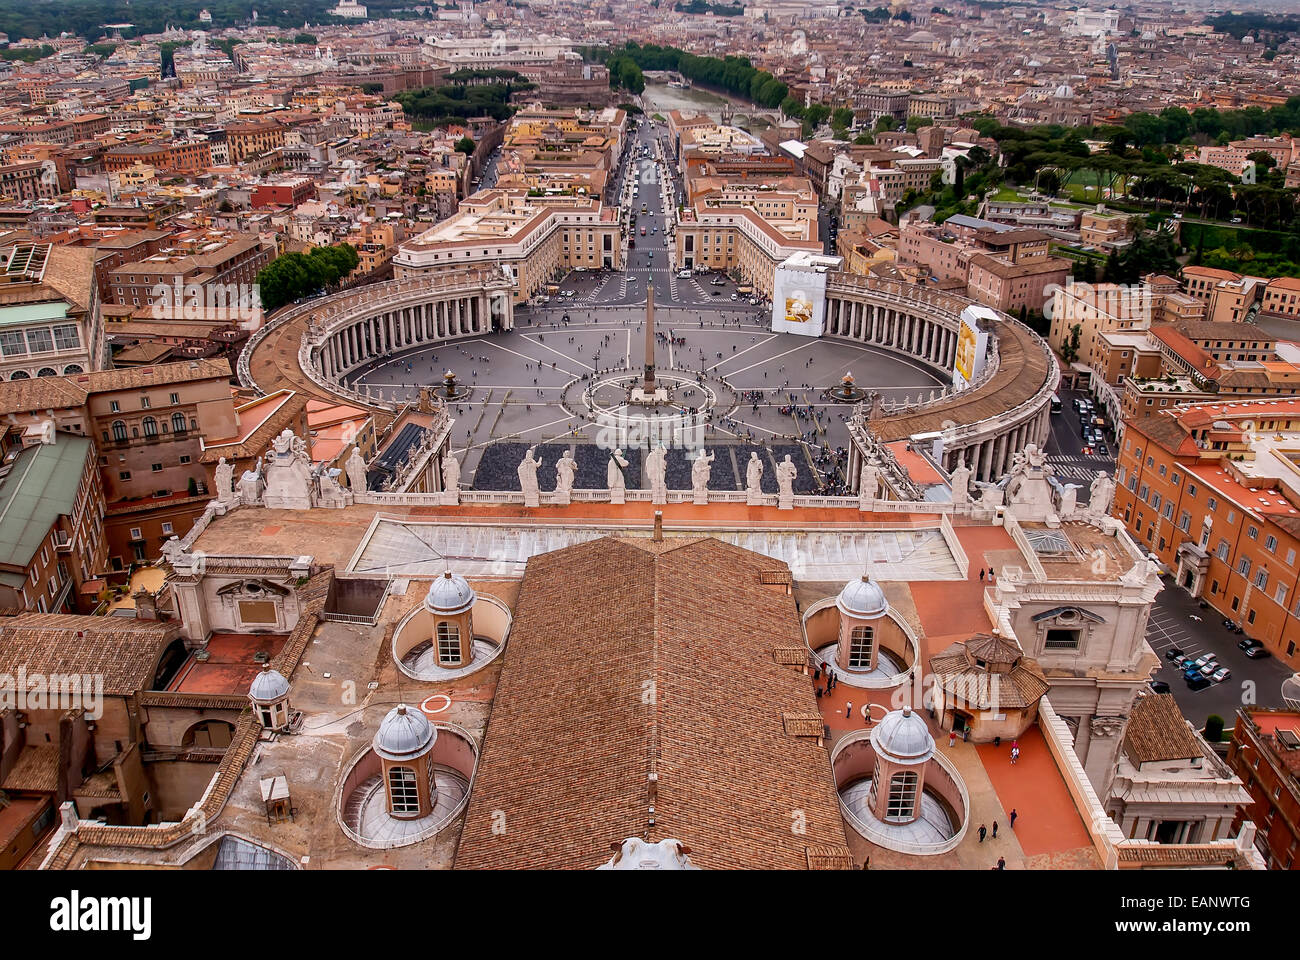 St. Peter's Square in the Vatican City. Stock Photo